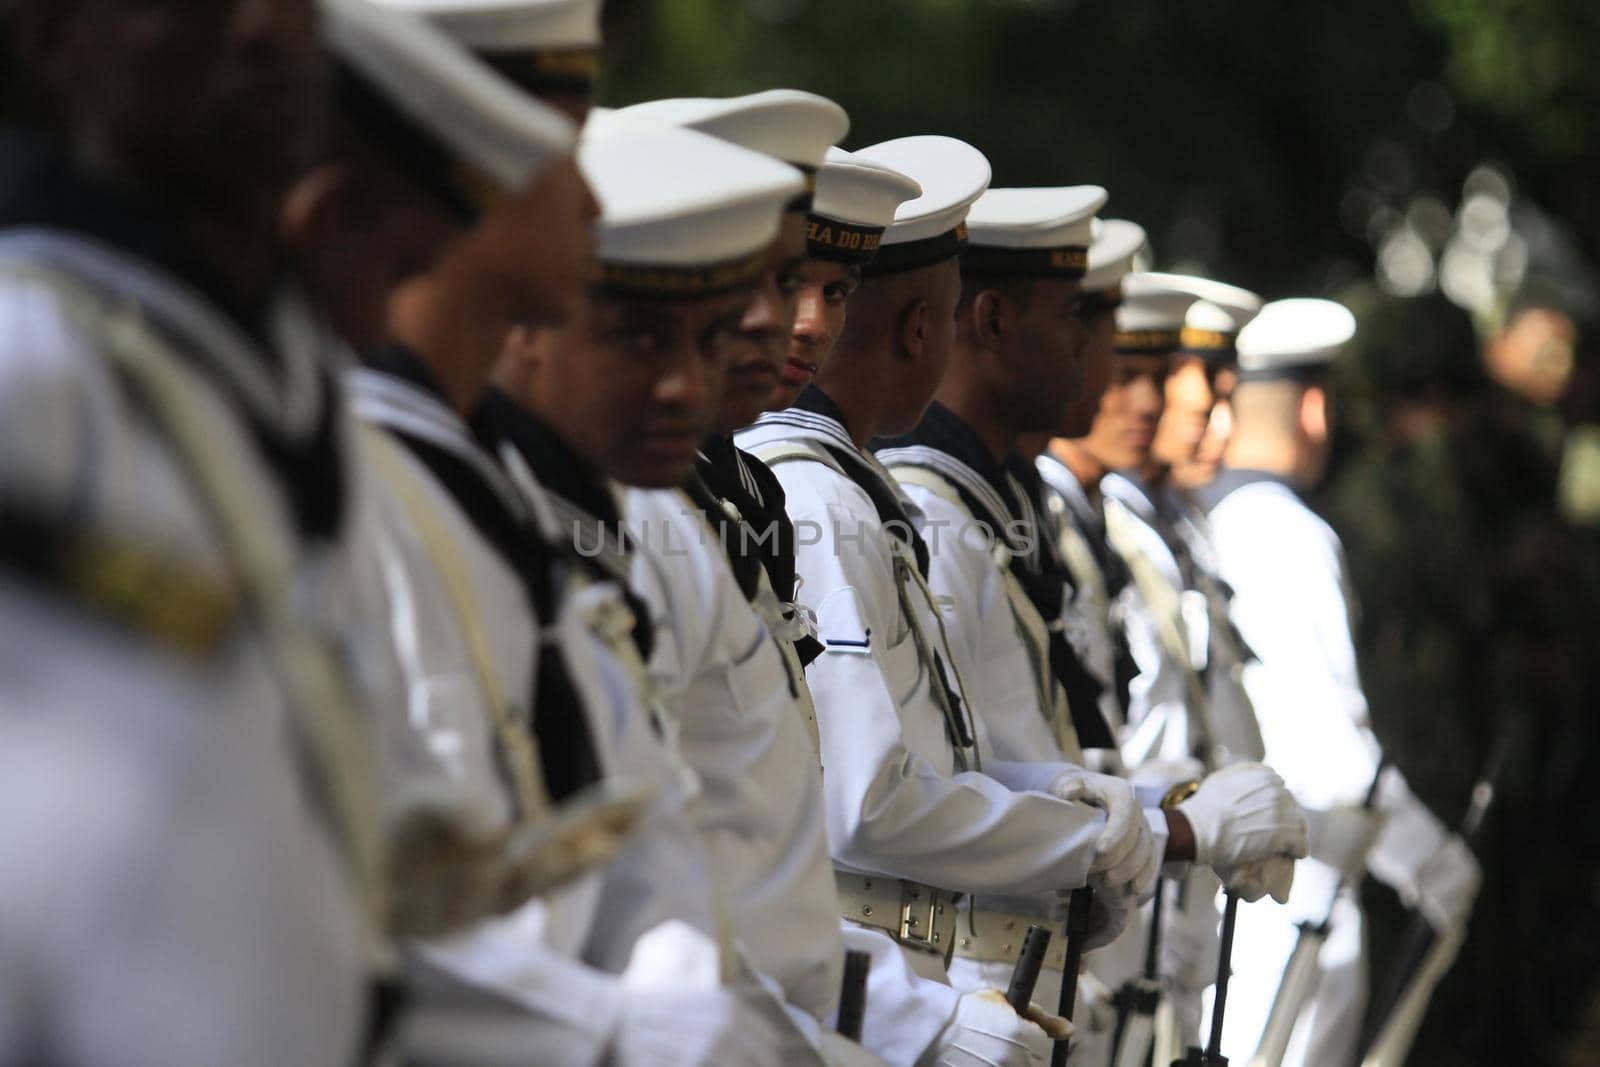 salvador, bahia, brazil - september 7, 2014: Military members of the Brazilian Navy during a civic-military parade in celebration of the independence of Brazil in the city of Salvador.